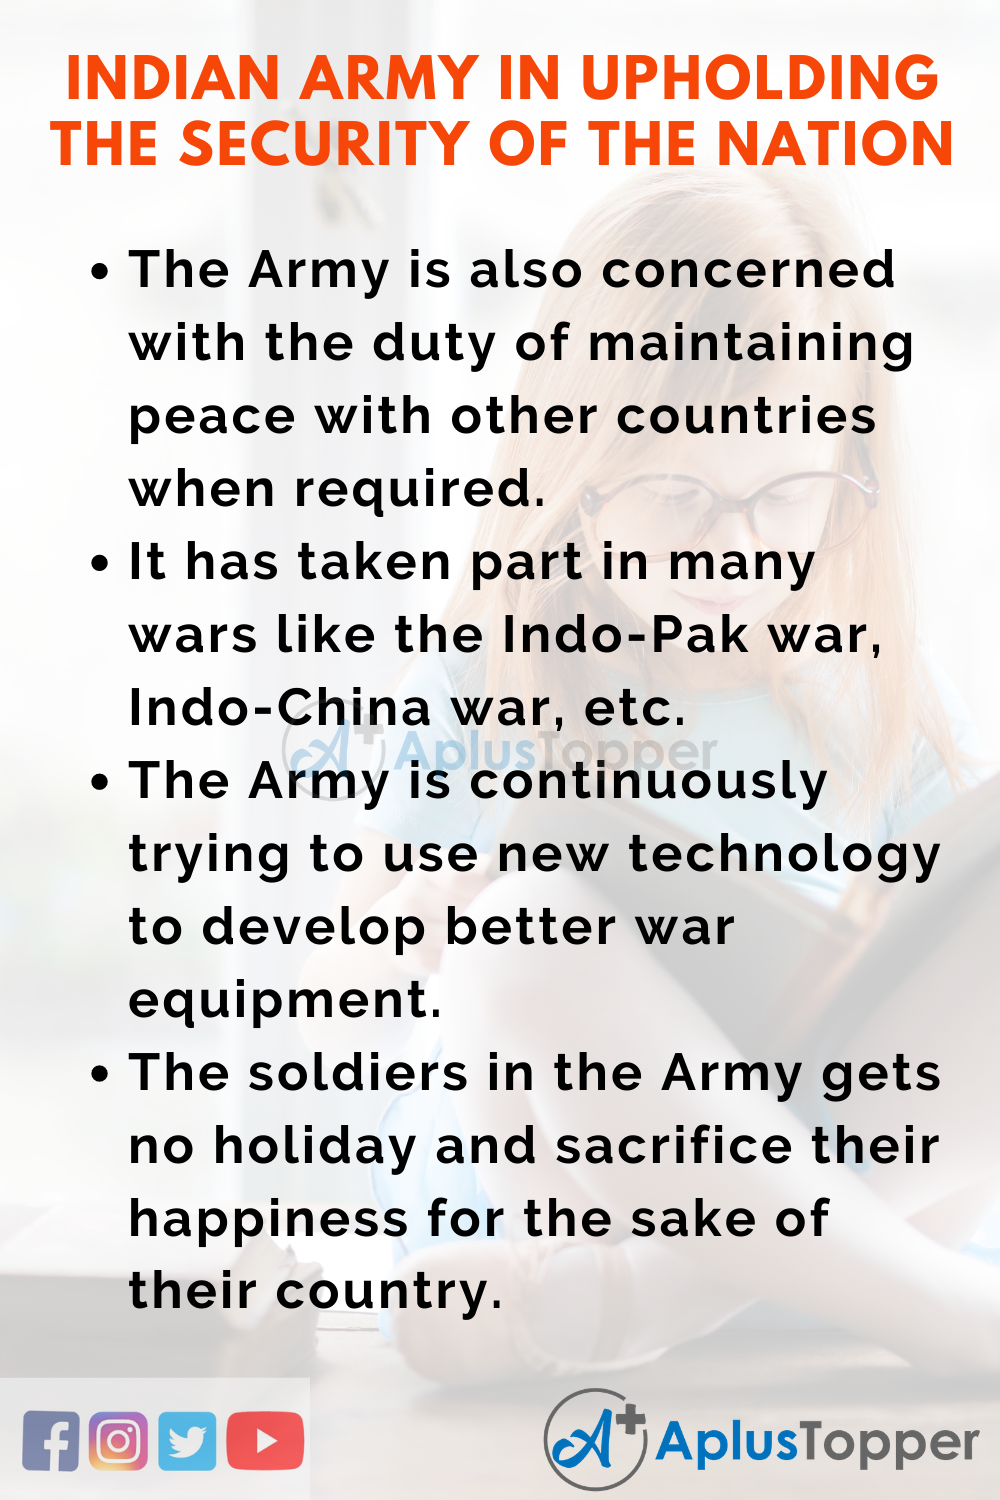 essay on indian army 150 words